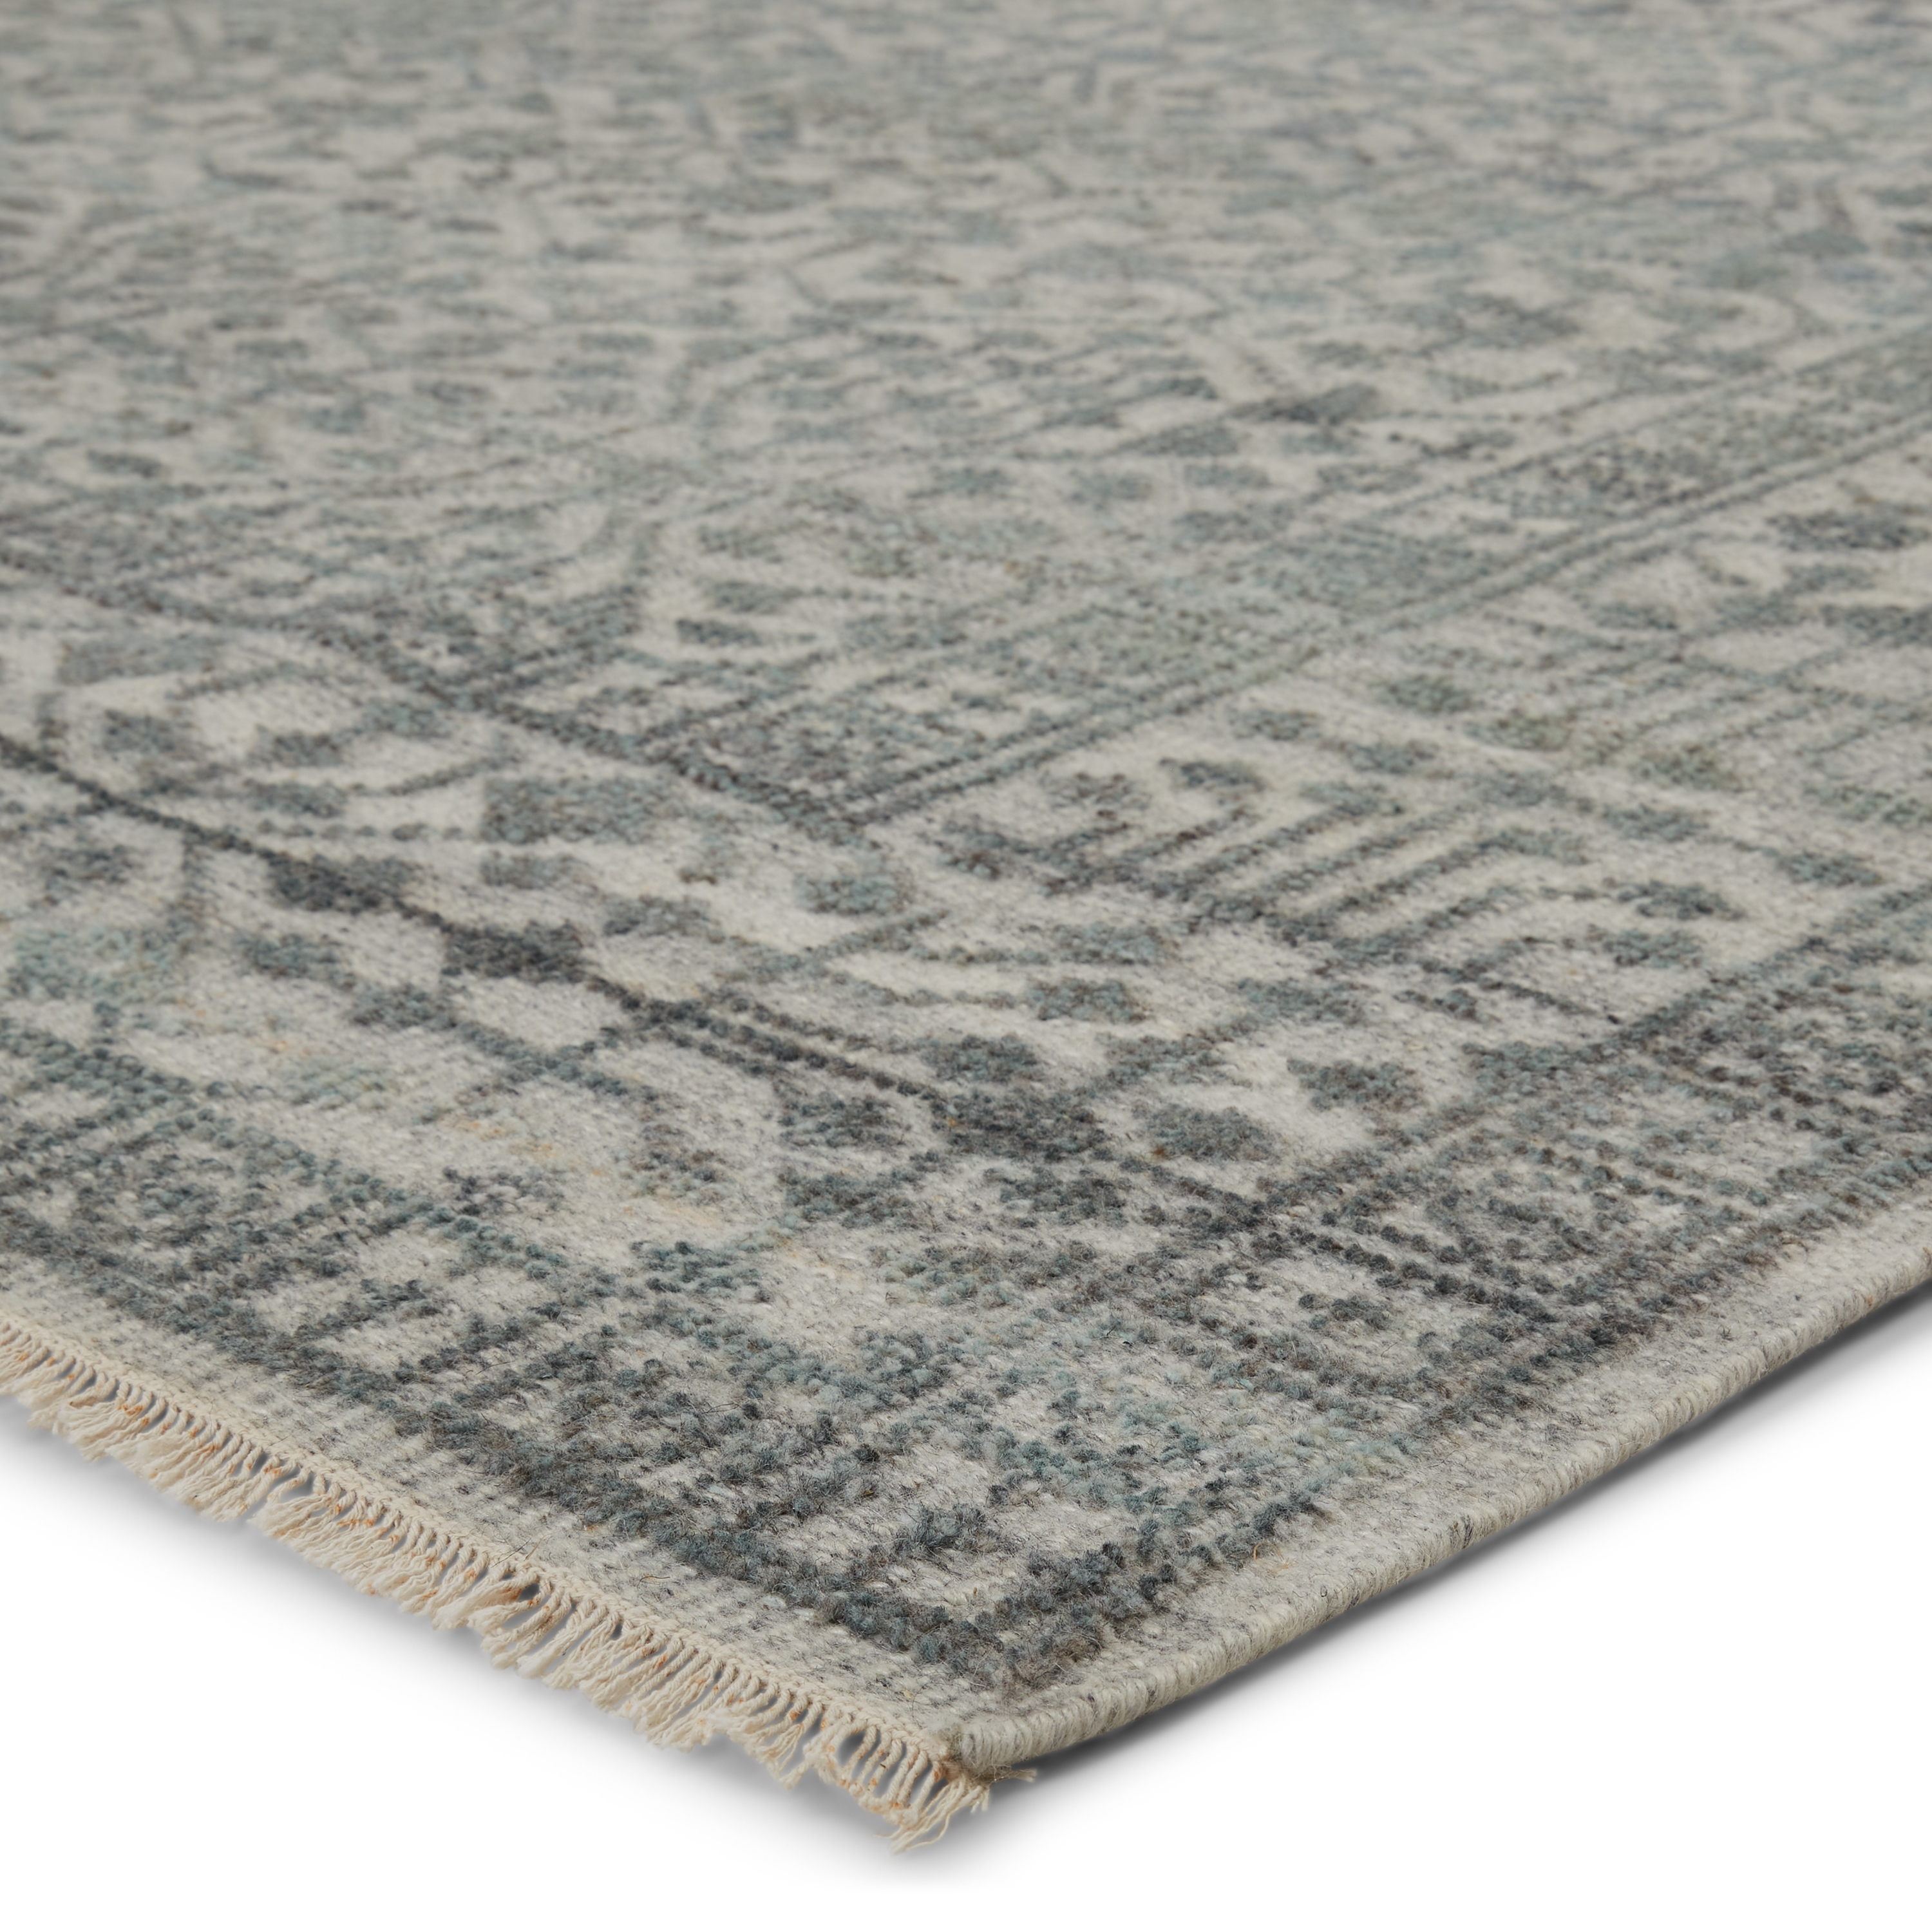 Arinna Hand-Knotted Tribal Gray/ Light Blue Area Rug (10'X14') - Image 1